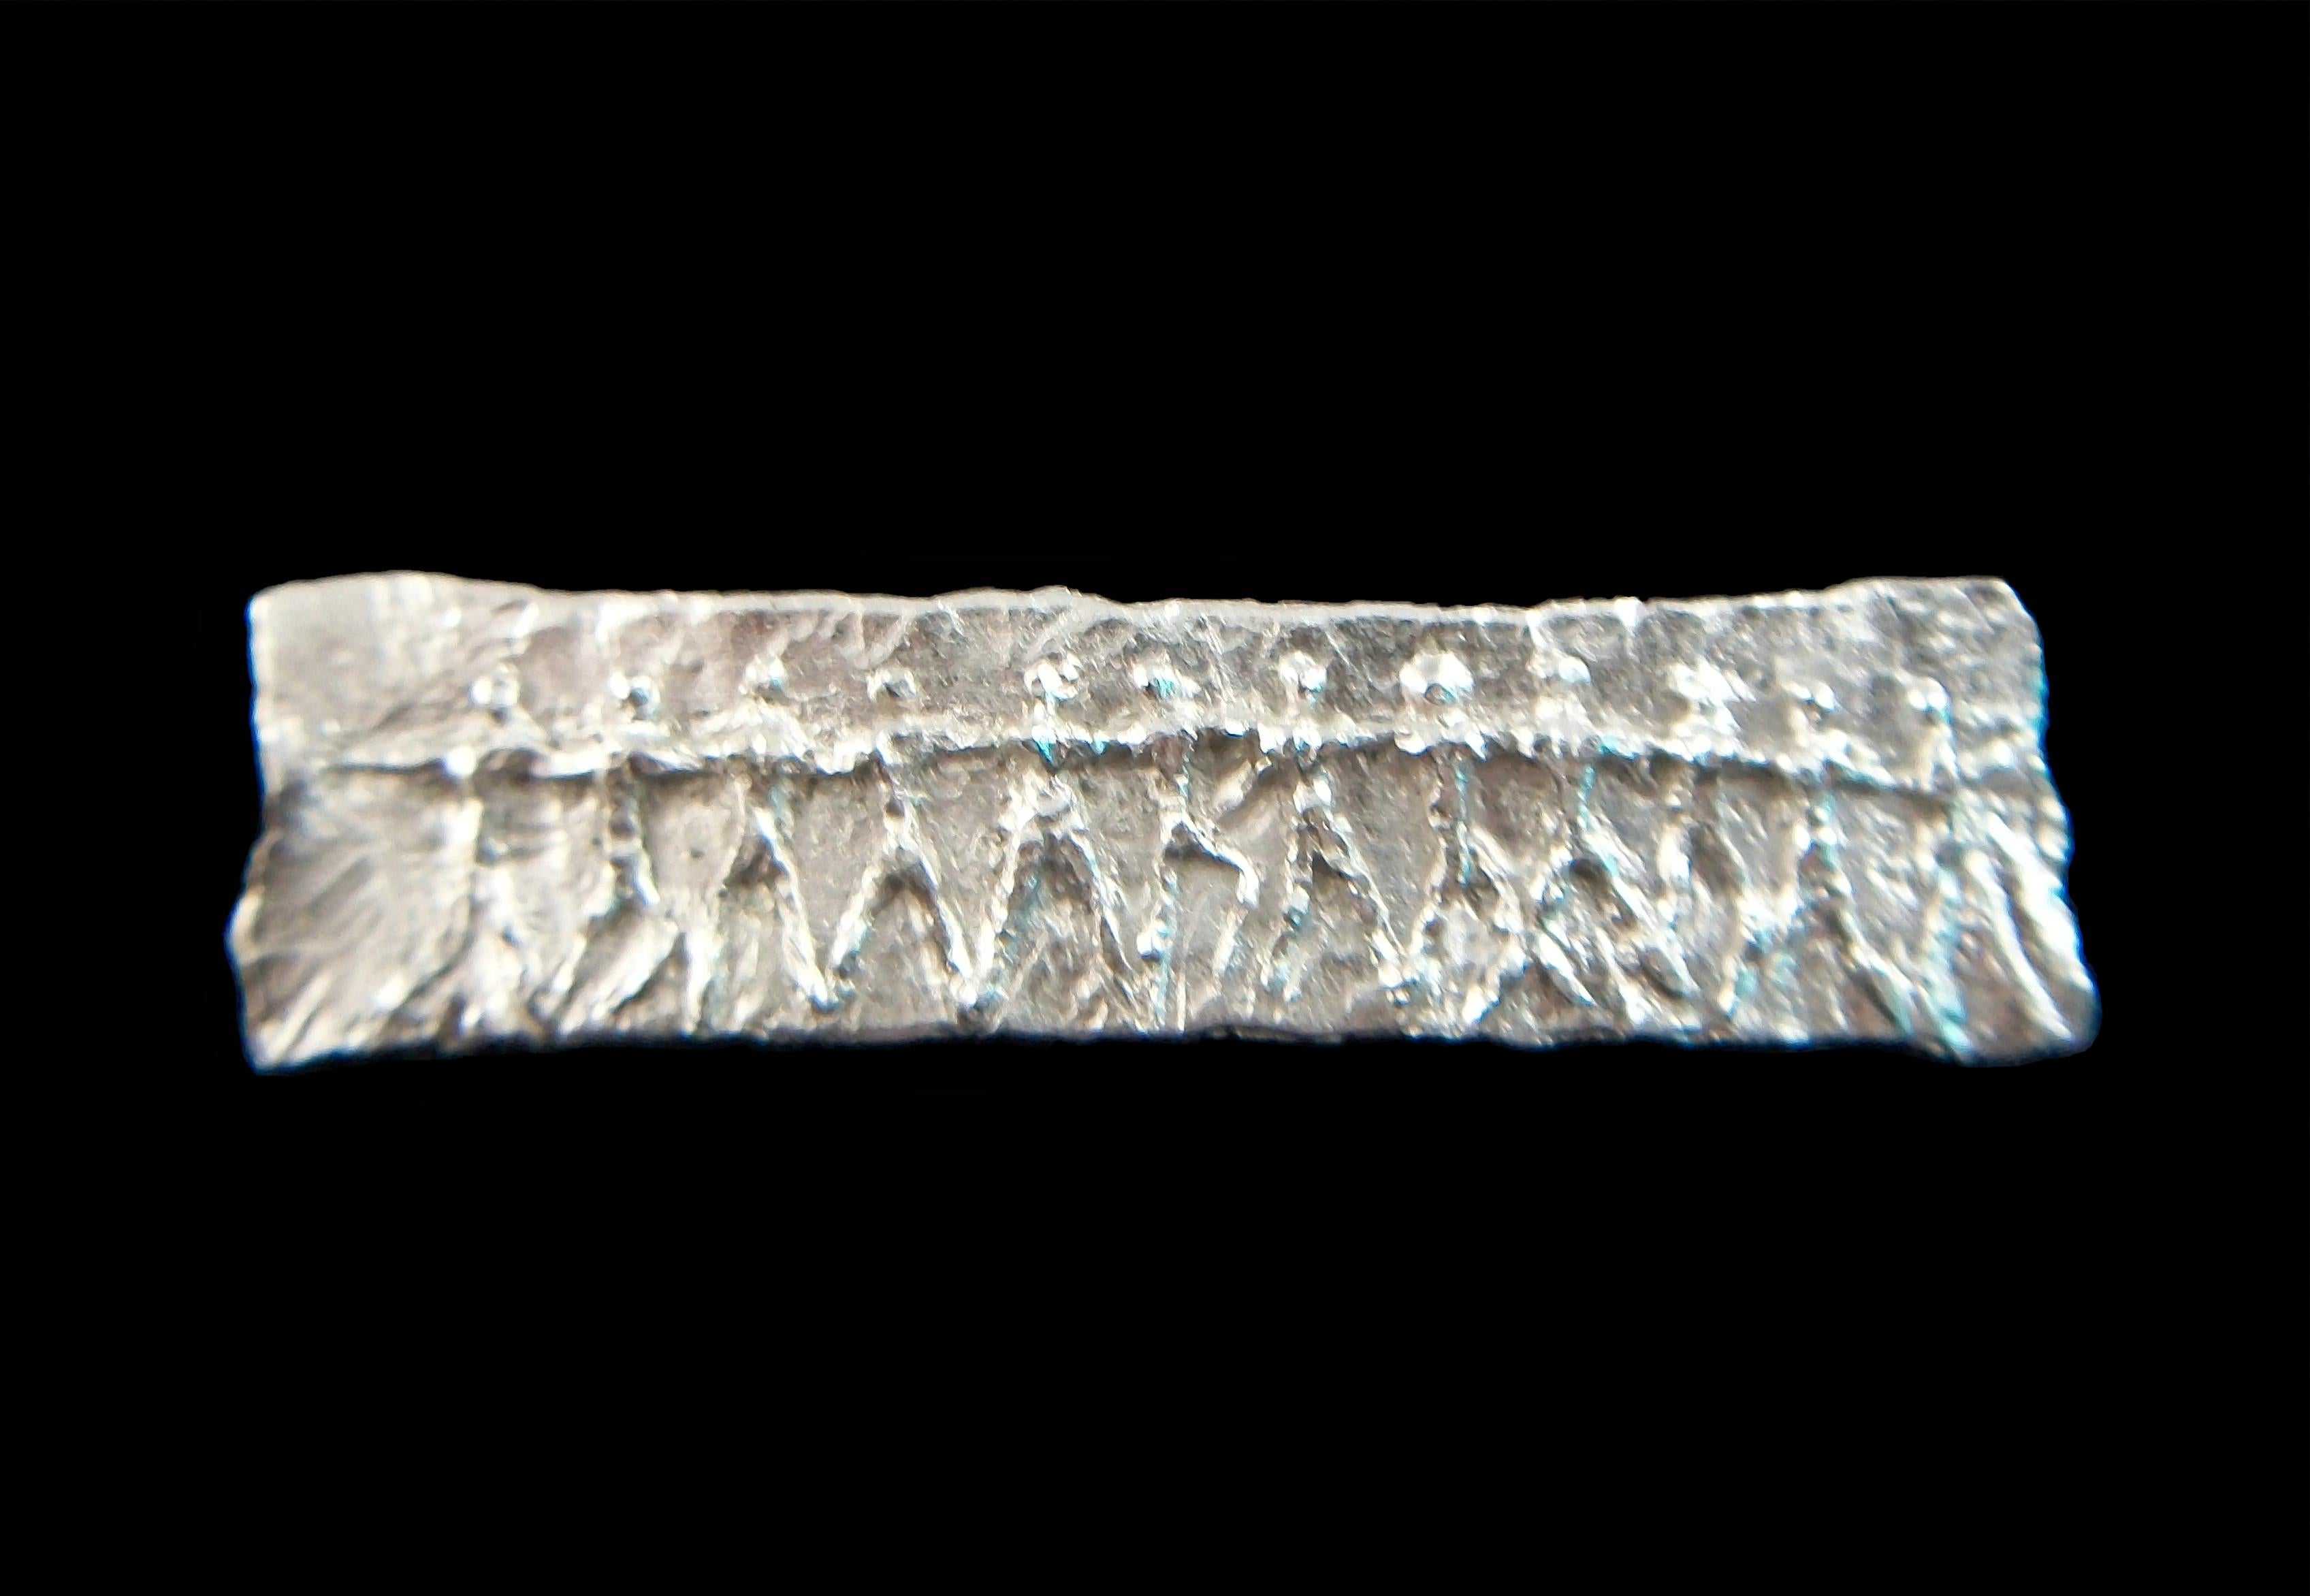 Modernist Figurative Silver Bar Brooch - Germany - Mid 20th Century For Sale 2